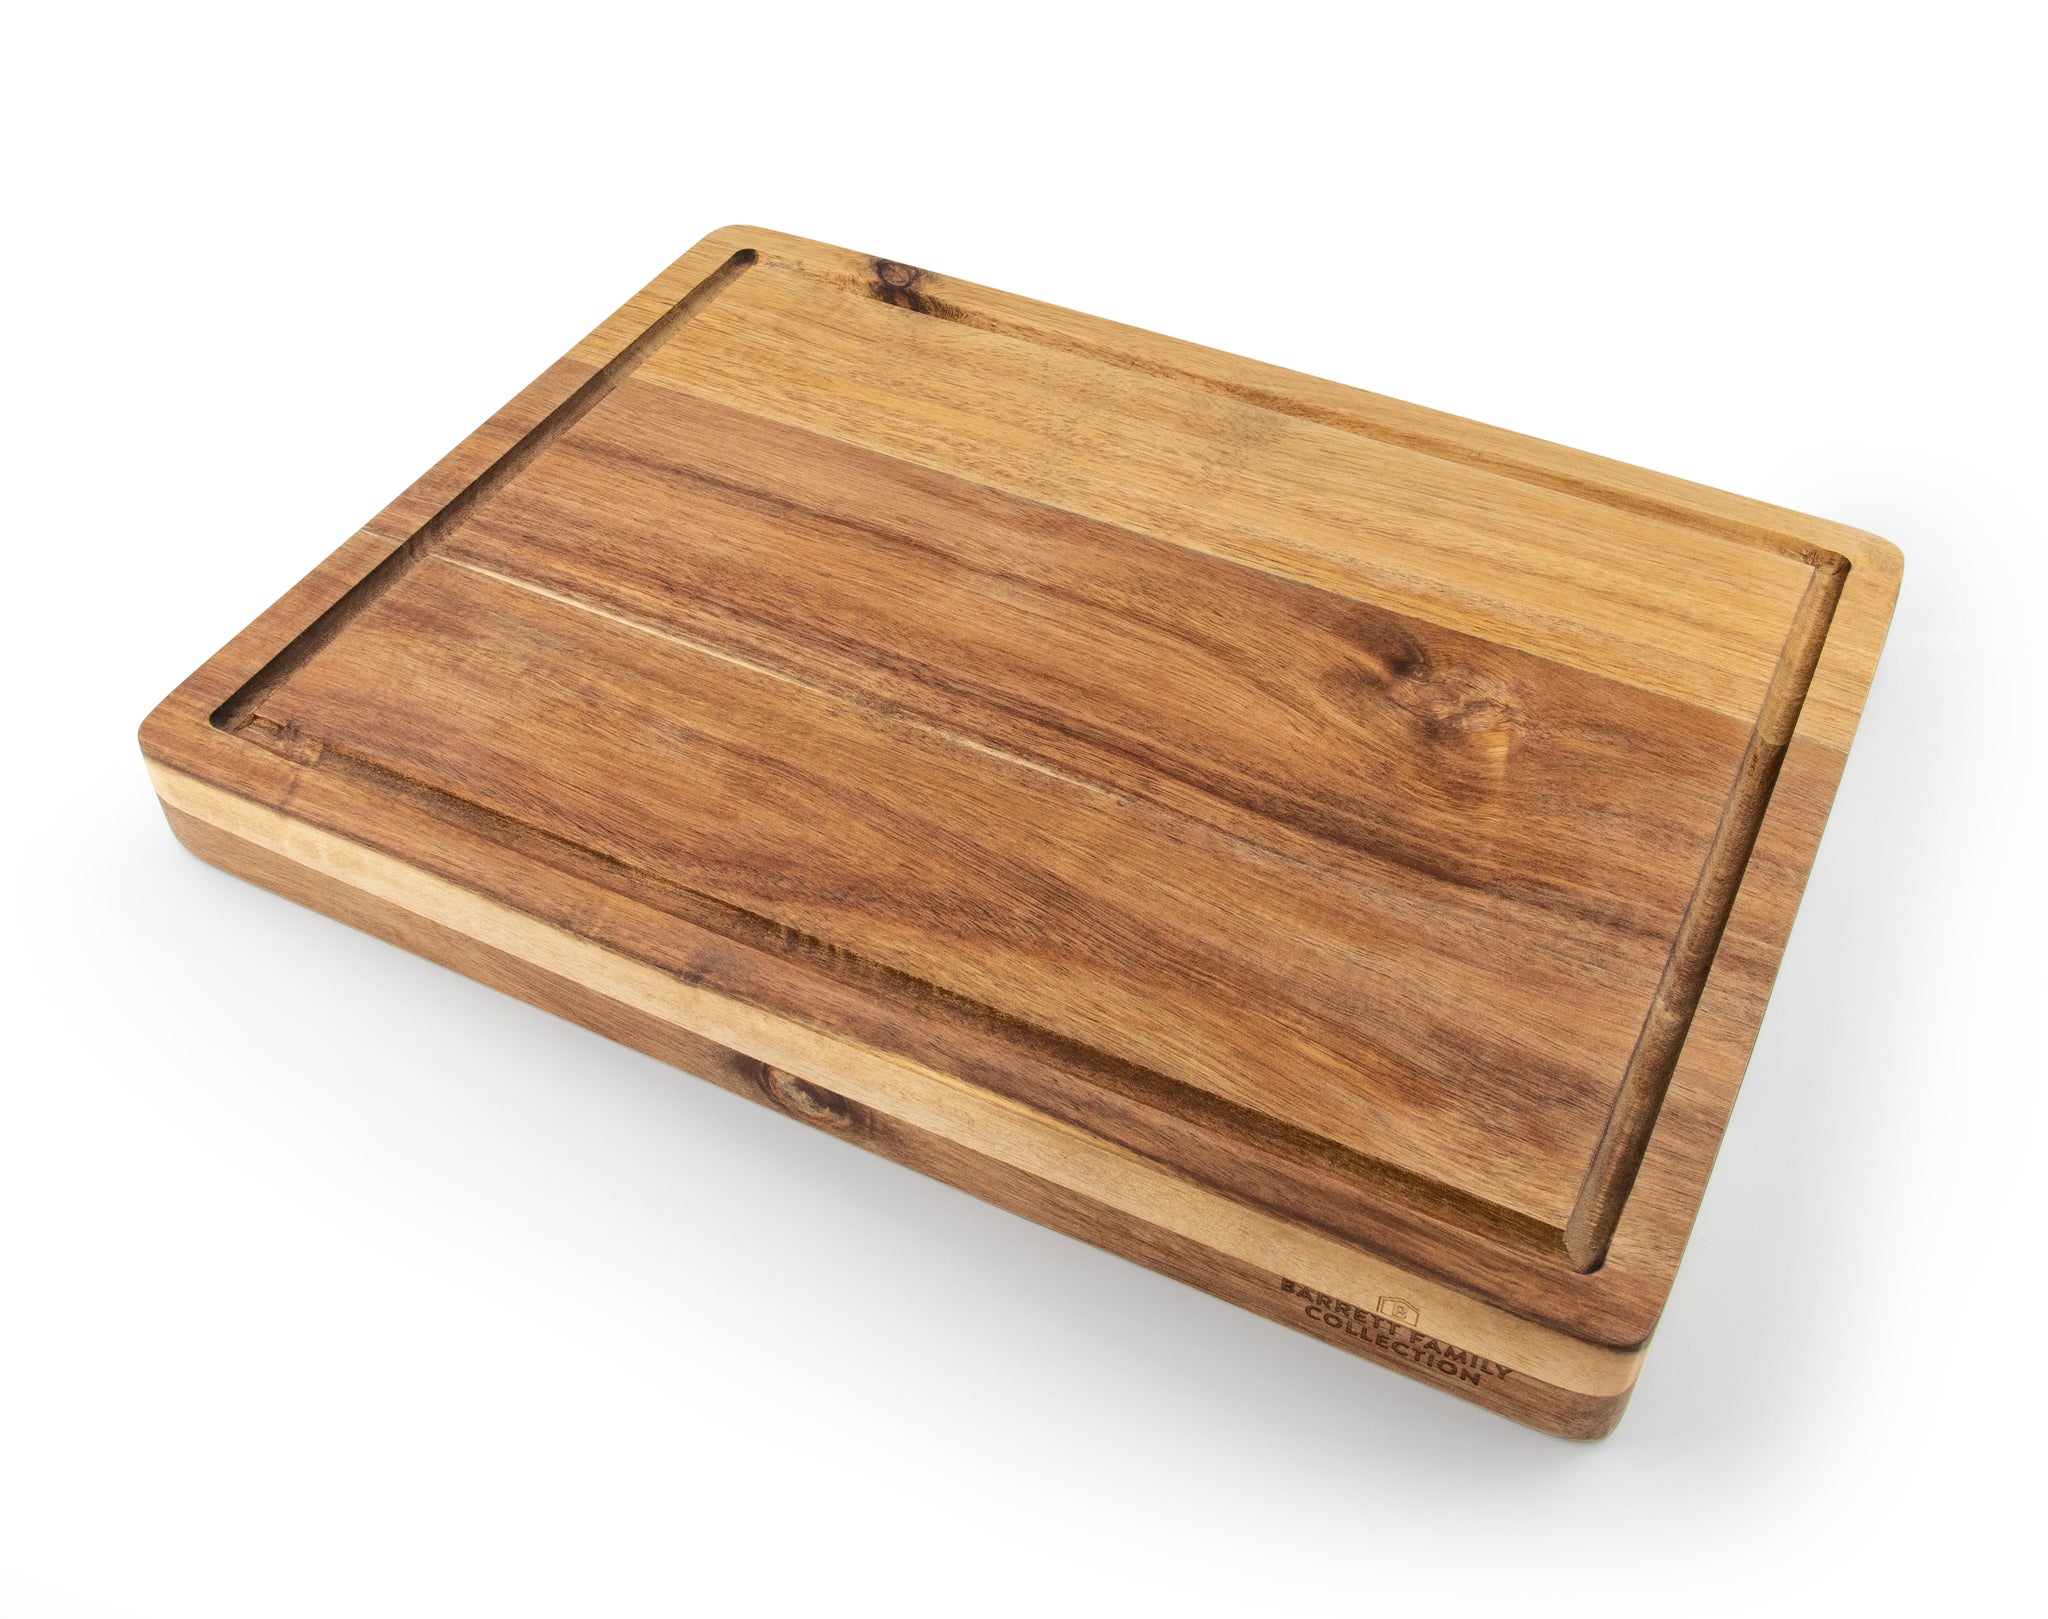 Premium Thick Bamboo Cutting Board Set of 2 Large Chopping Board